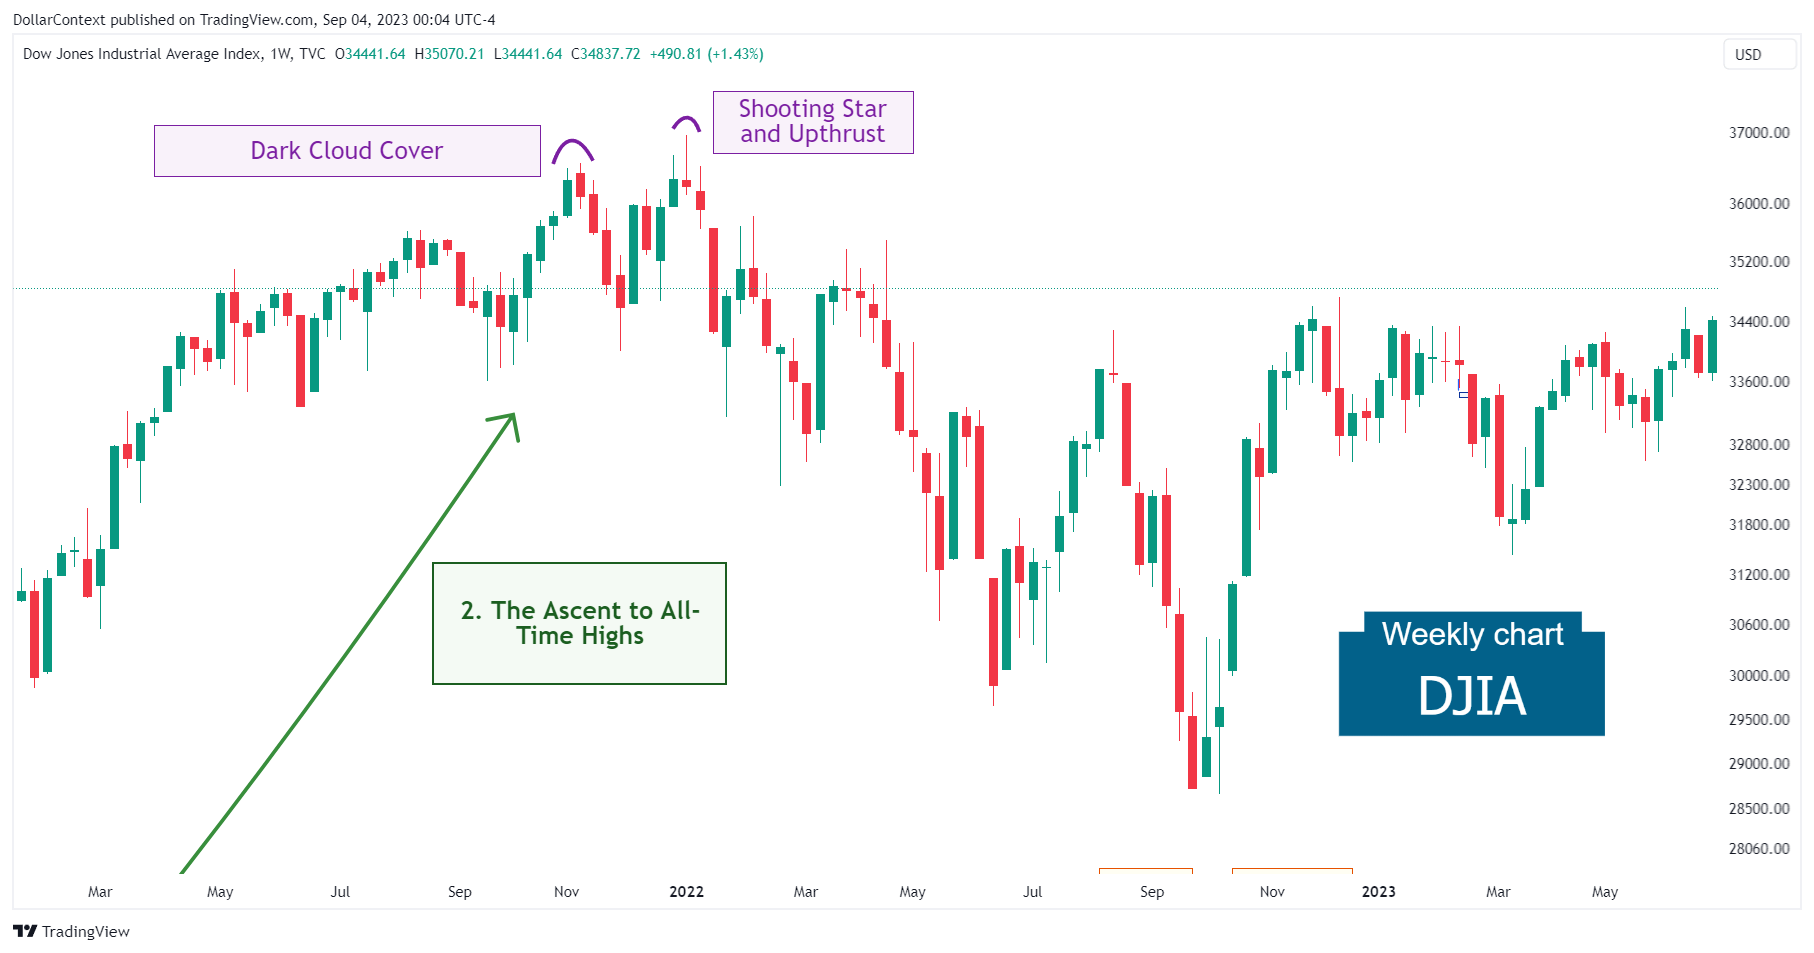 DJIA: Dark Cloud Cover in November 2021 and Shooting Star in January 2022 (Weekly Chart)